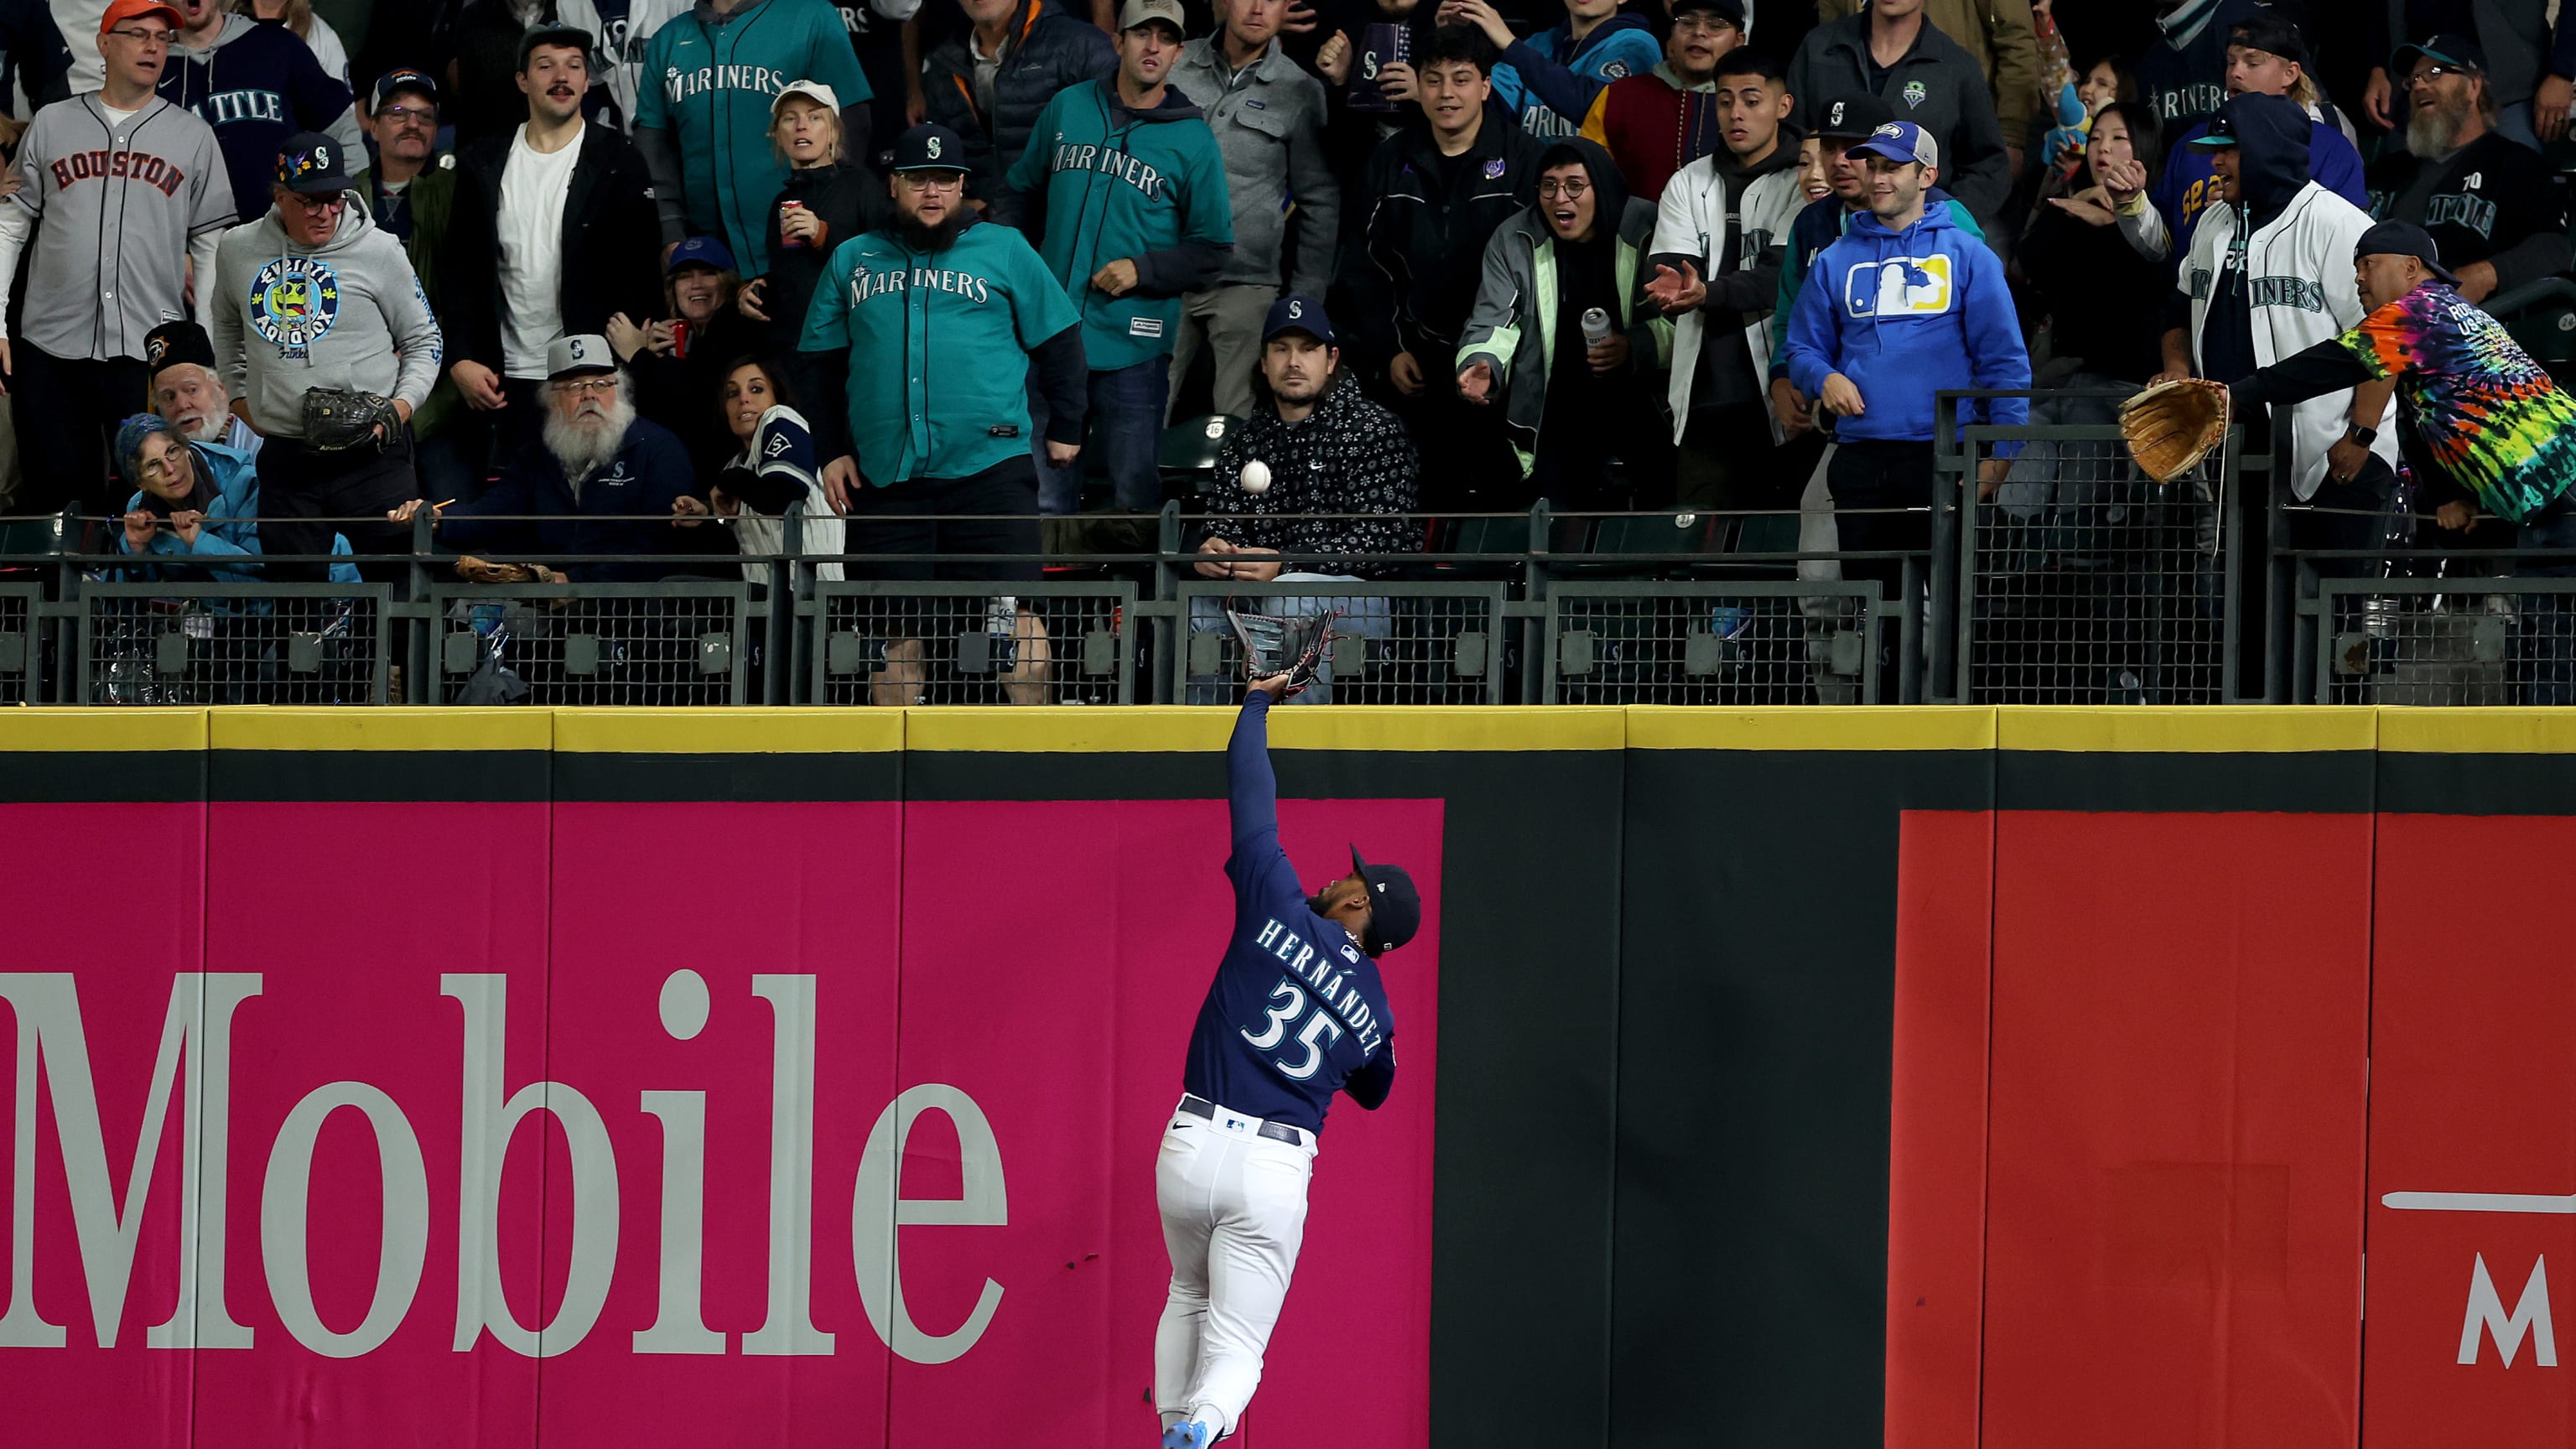 Mariners forget definition of insanity, lose 0-4 to Astros